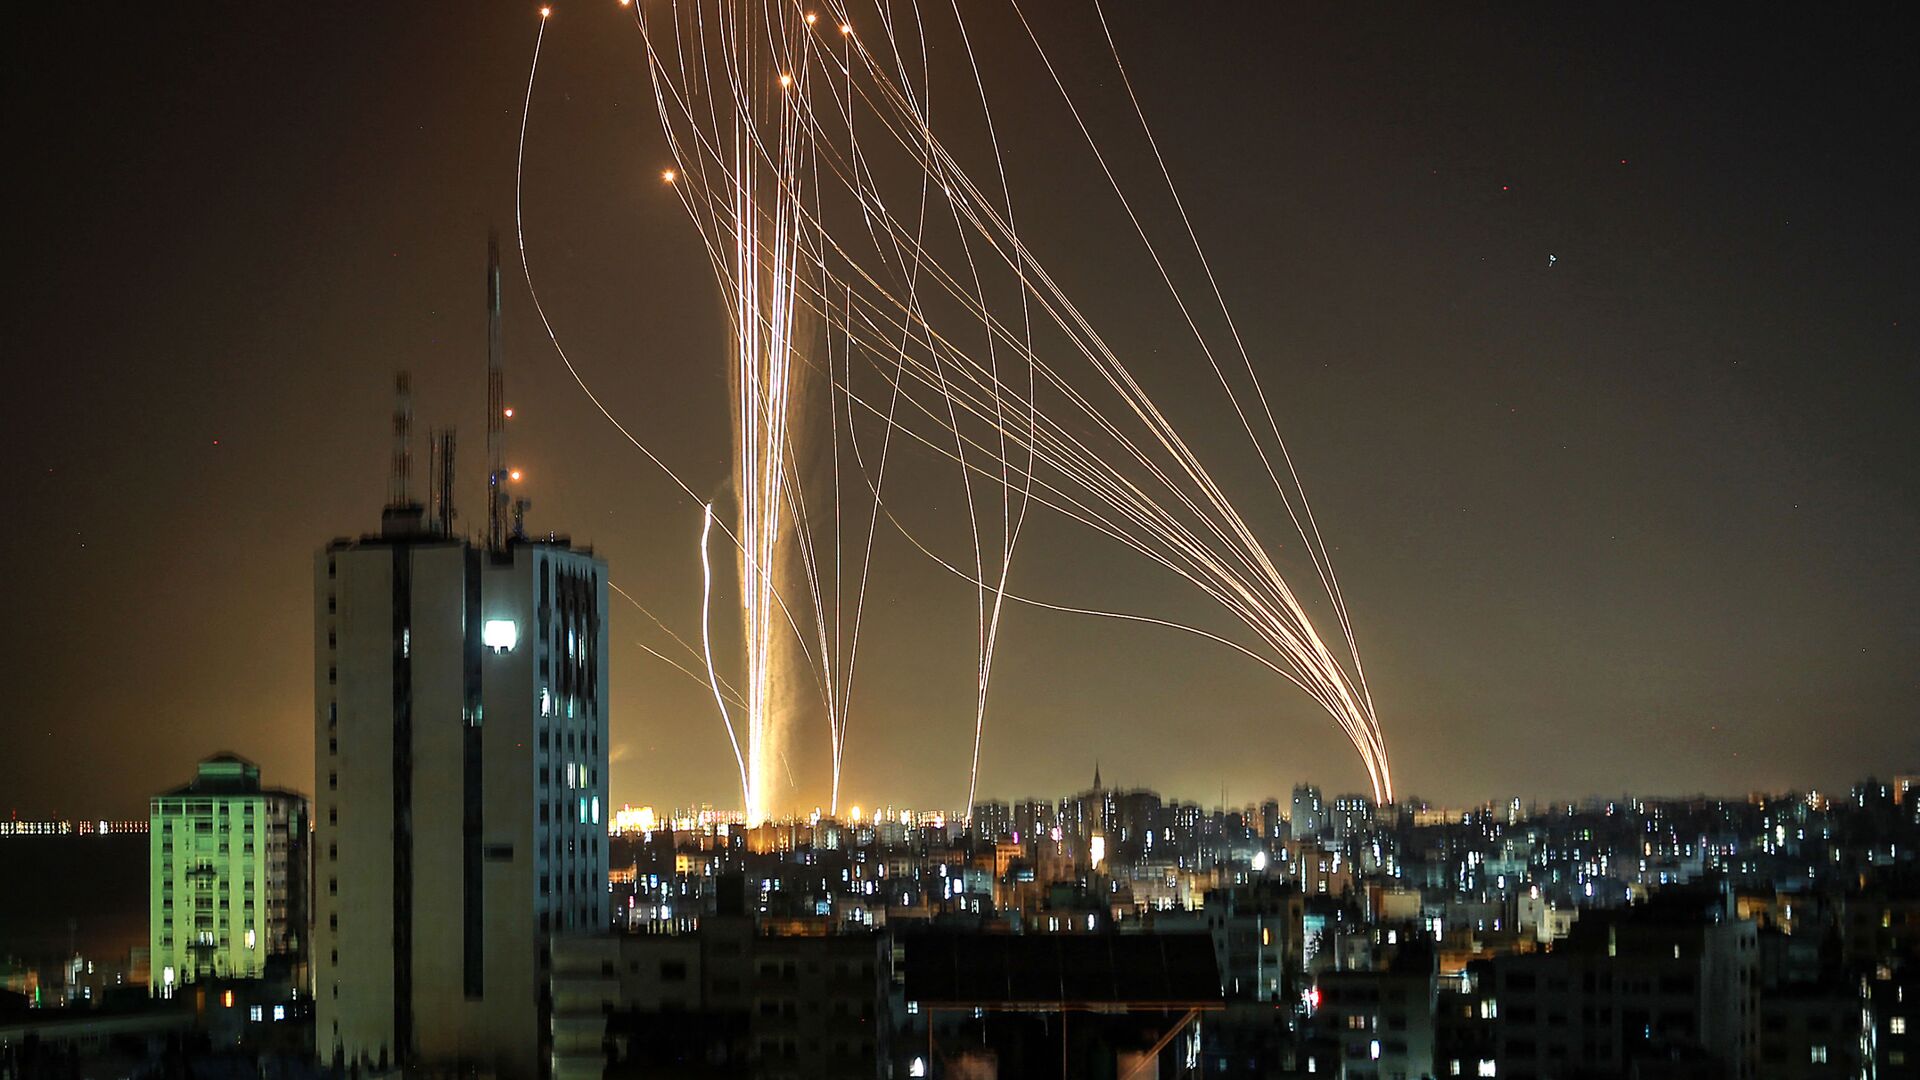 Rockets are launched from Gaza city, controlled by the Palestinian Hamas movement, in response to an Israeli air strike on a 12-storey building in the city, towards the coastal city of Tel Aviv, on 11 May 2021 - Sputnik International, 1920, 24.05.2021